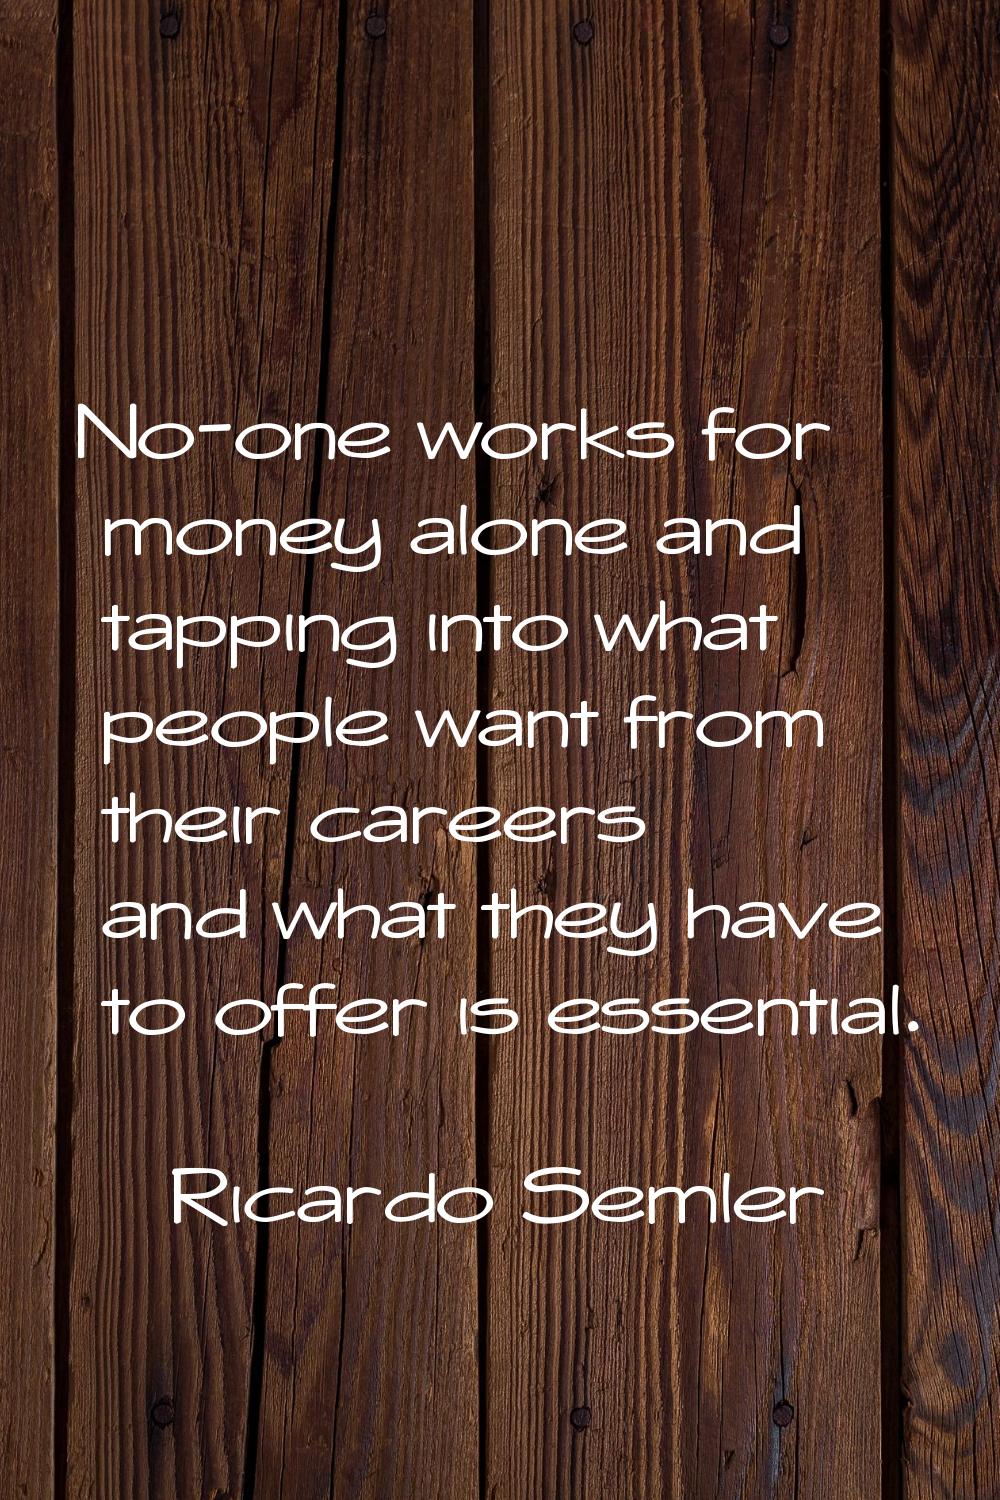 No-one works for money alone and tapping into what people want from their careers and what they hav